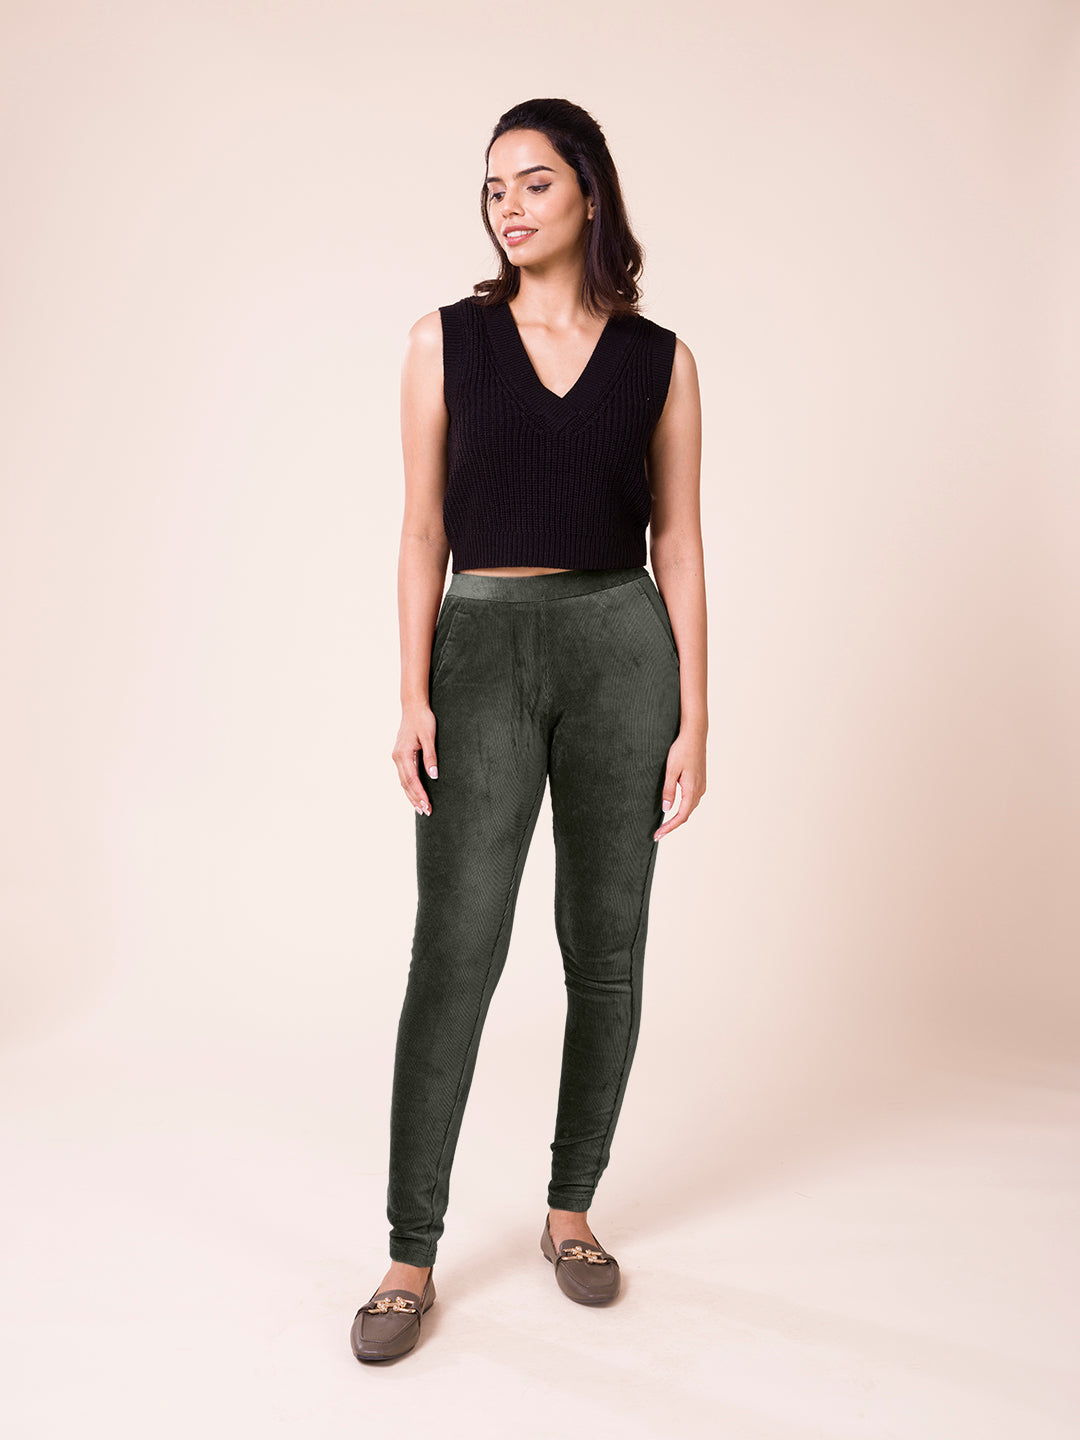 Pin by Vida Leatherday on Clothes | Casual outfits, Green pants outfit,  High waisted pants outfit